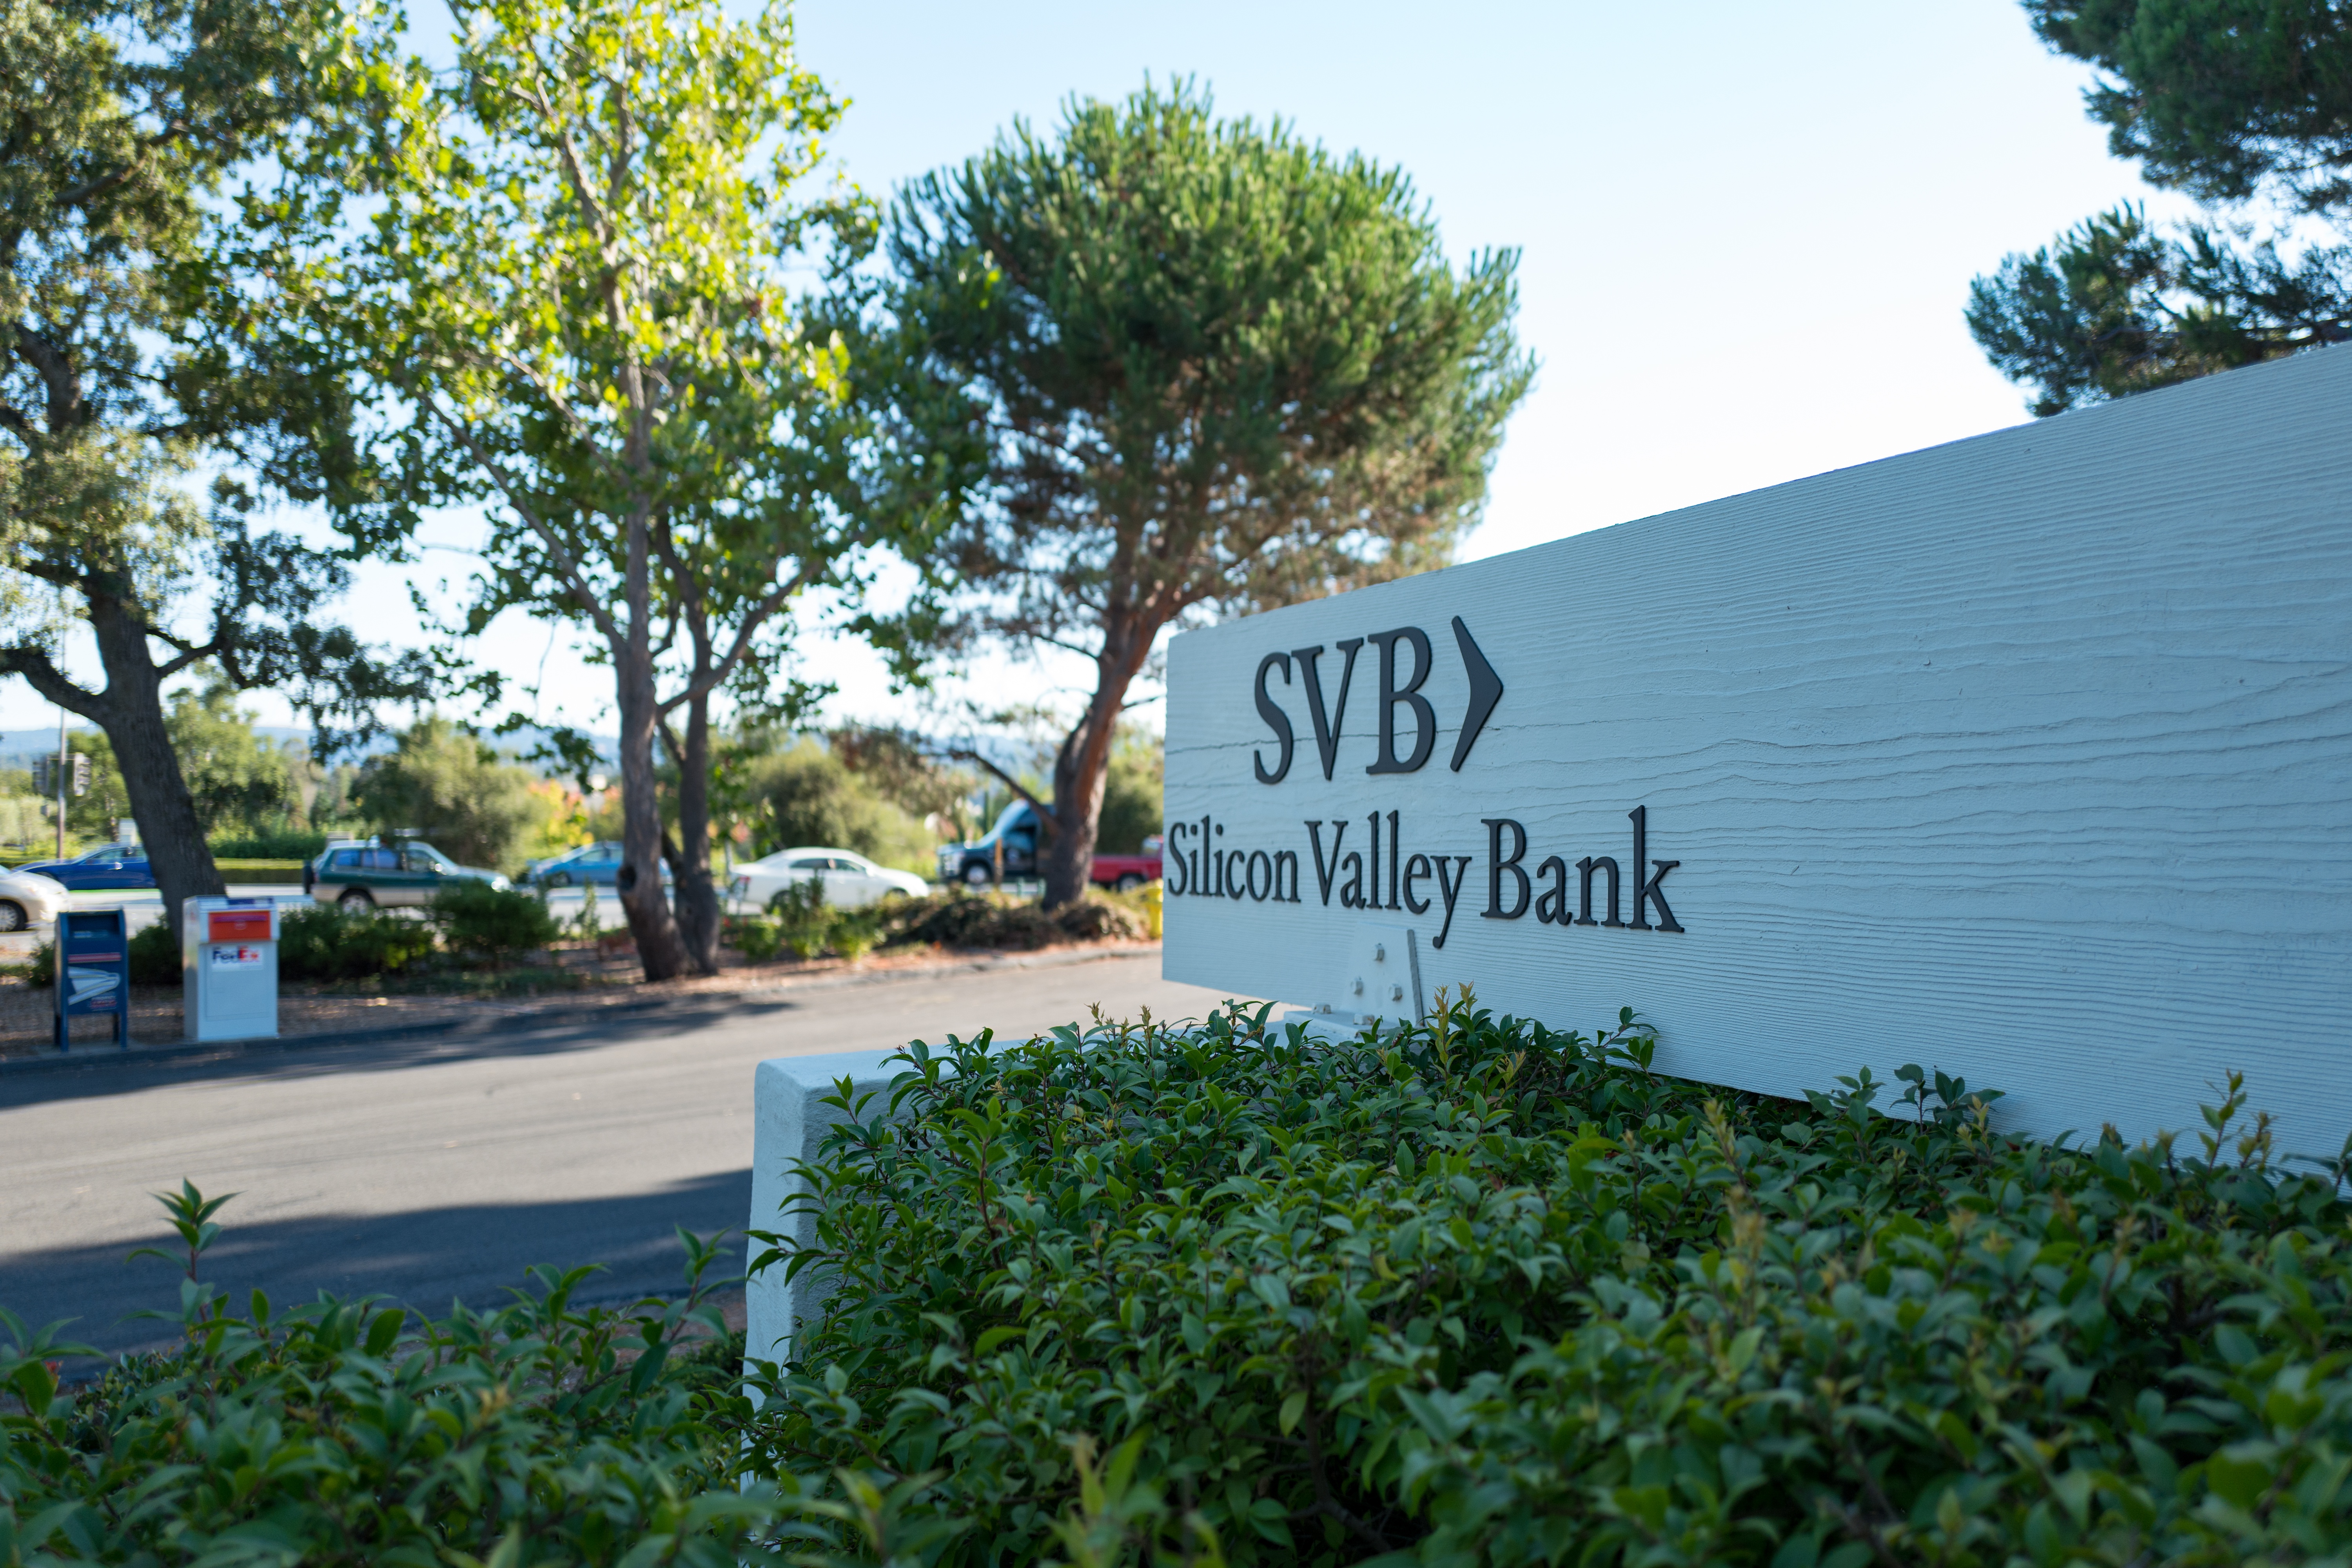 Regulators close Silicon Valley Bank in largest failure since financial crisis